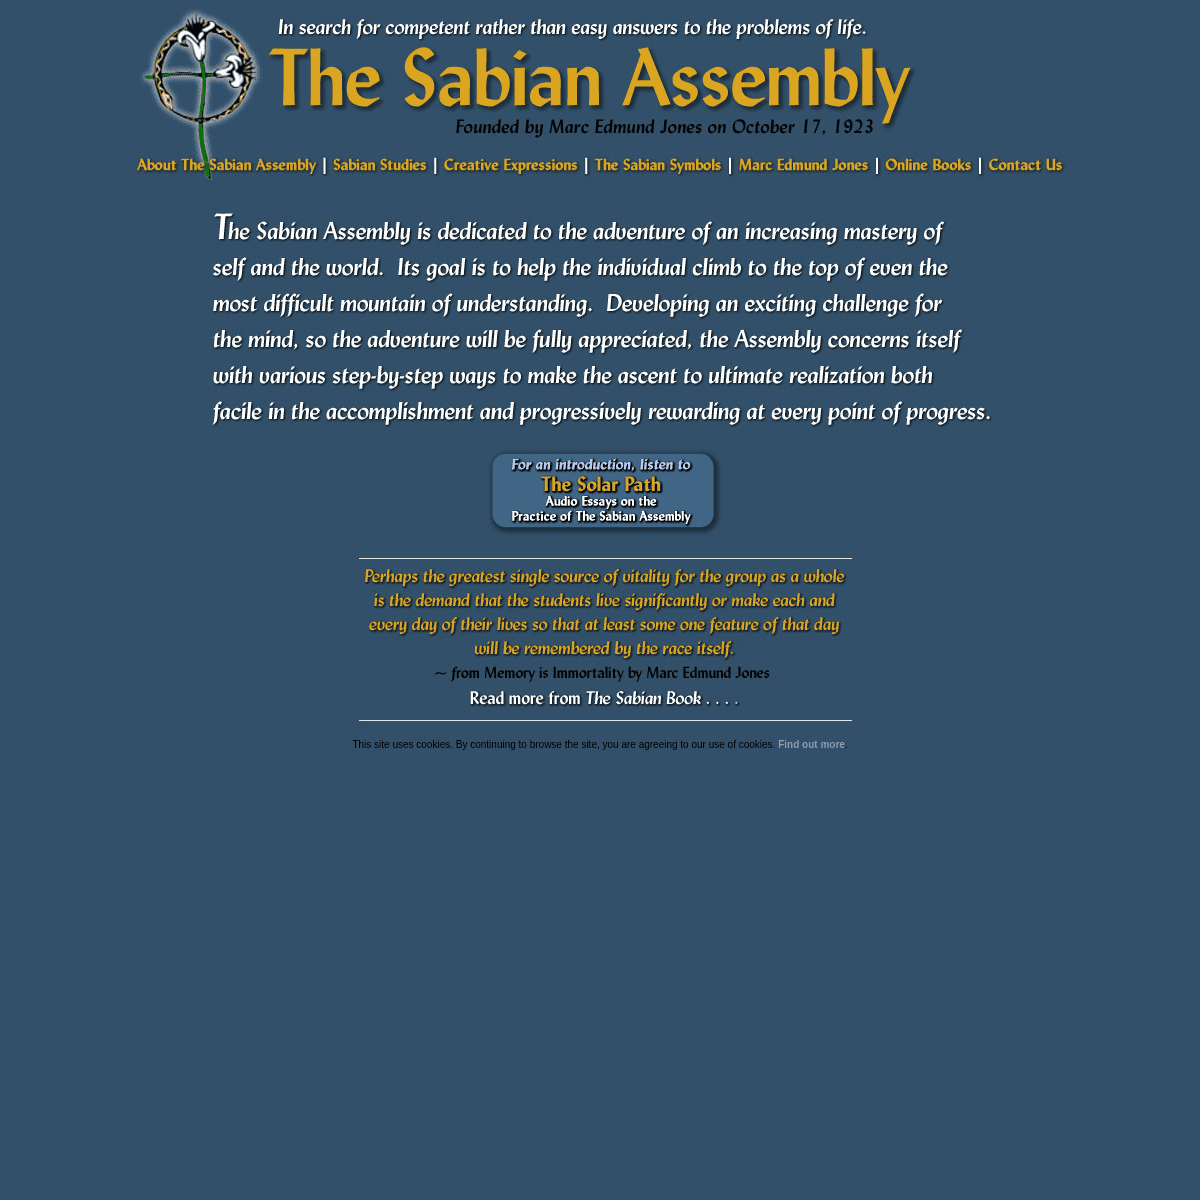 A complete backup of https://sabian.org